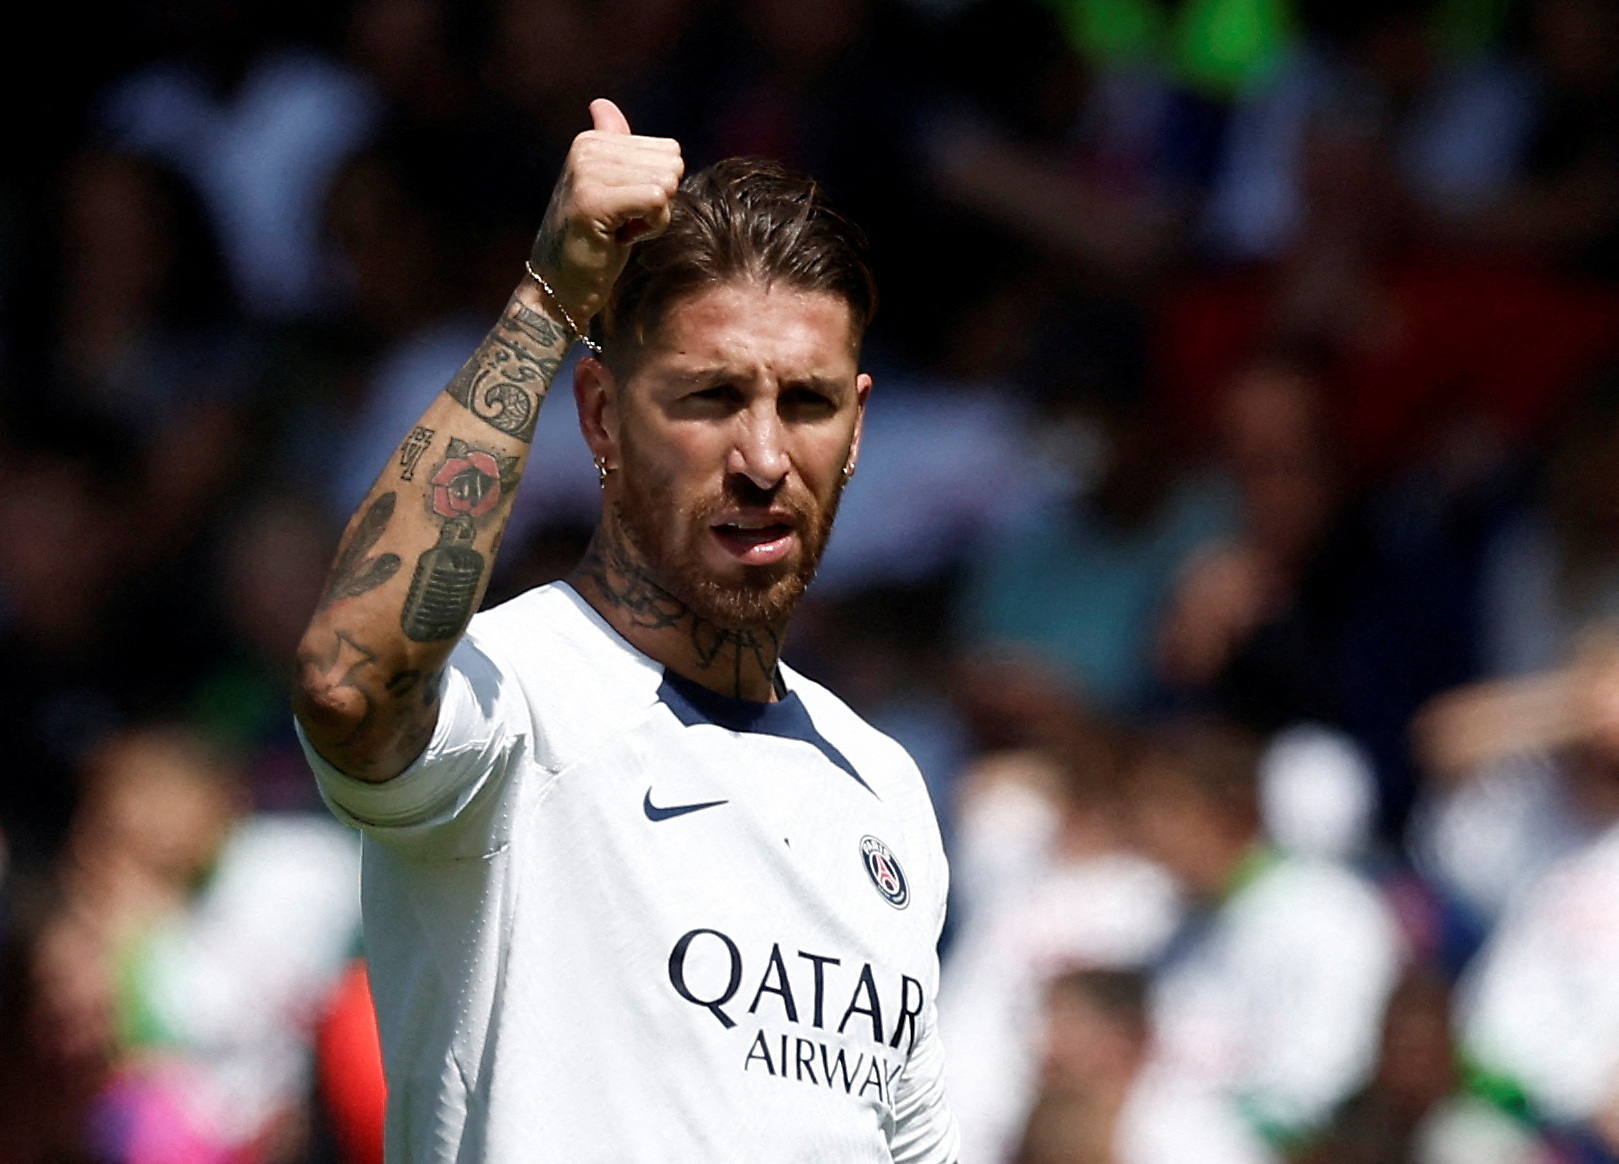 Sergio Ramos to become unemployed as World Cup and four-time Champions League winner follows Messi out of PSG